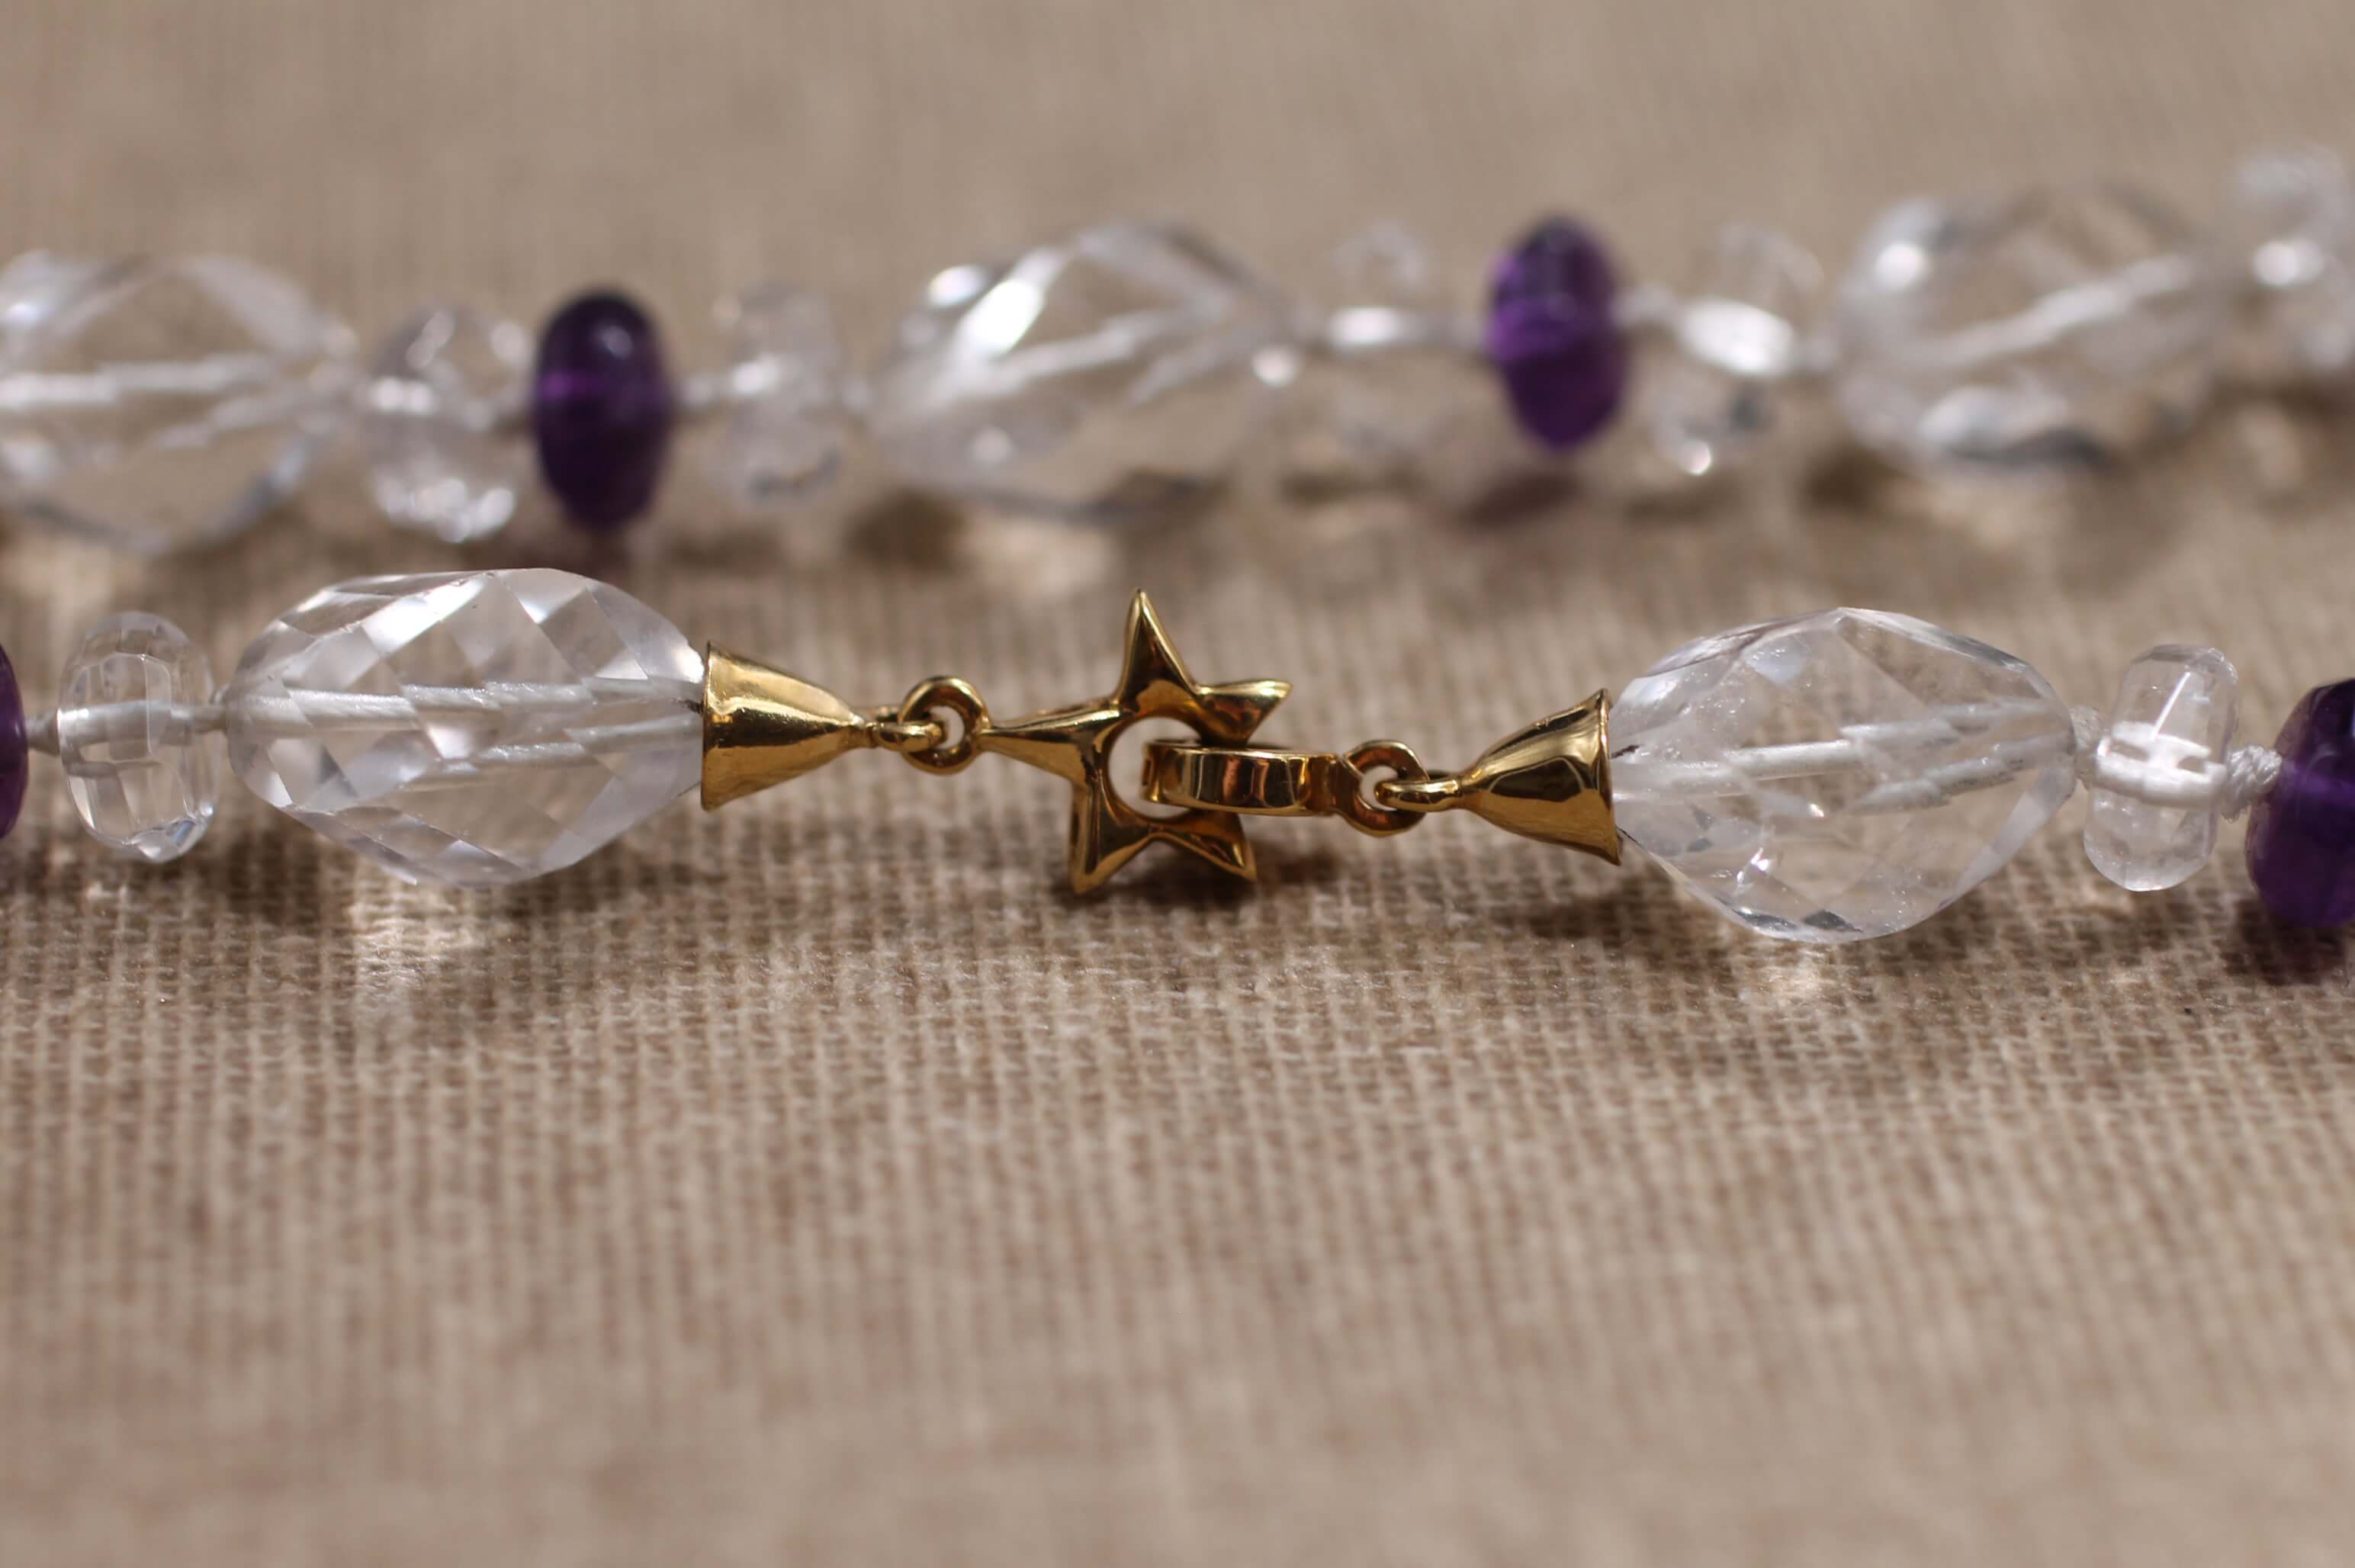 Rock Crystal, Amethyst and yellow Gold necklace